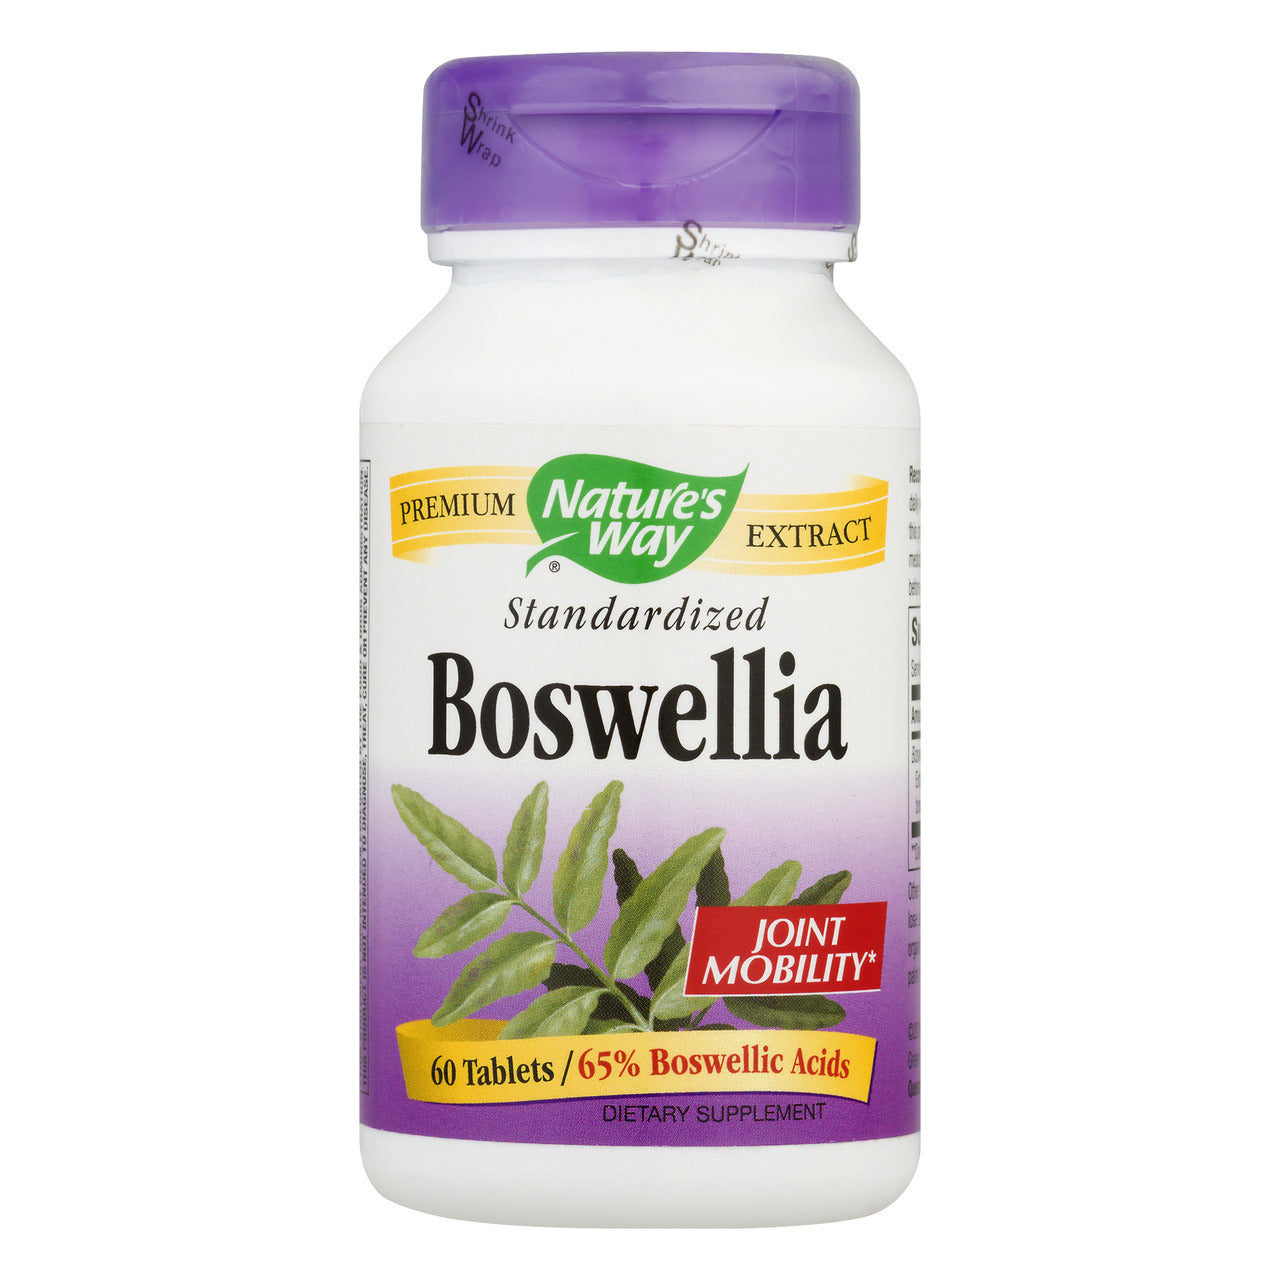 NW STAND BOSWELLIA EXT ( 1 X 60 TAB  )